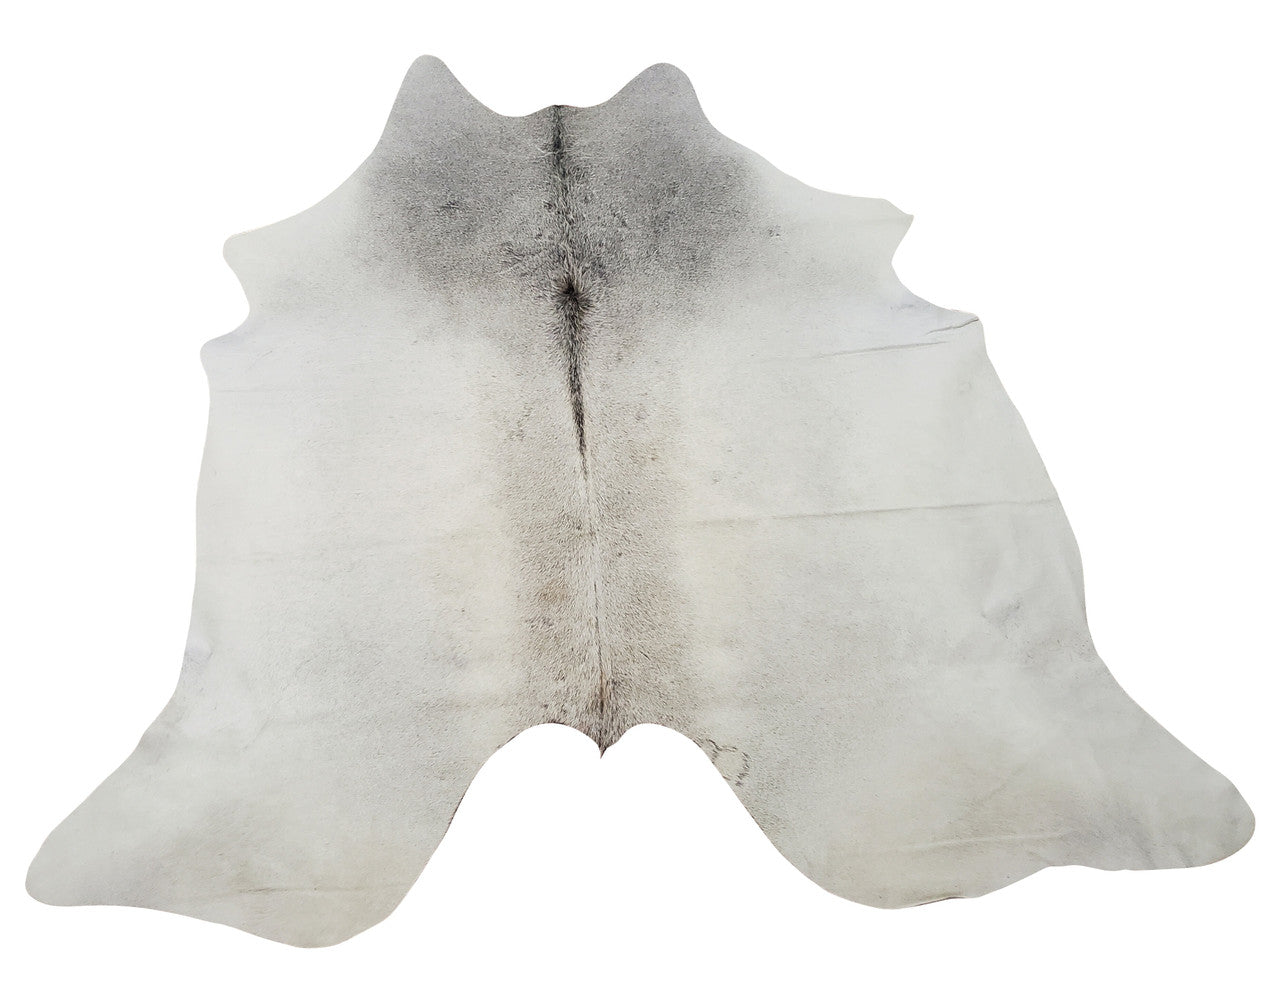 Buy the top-notch quality cowhide rugs or regret later